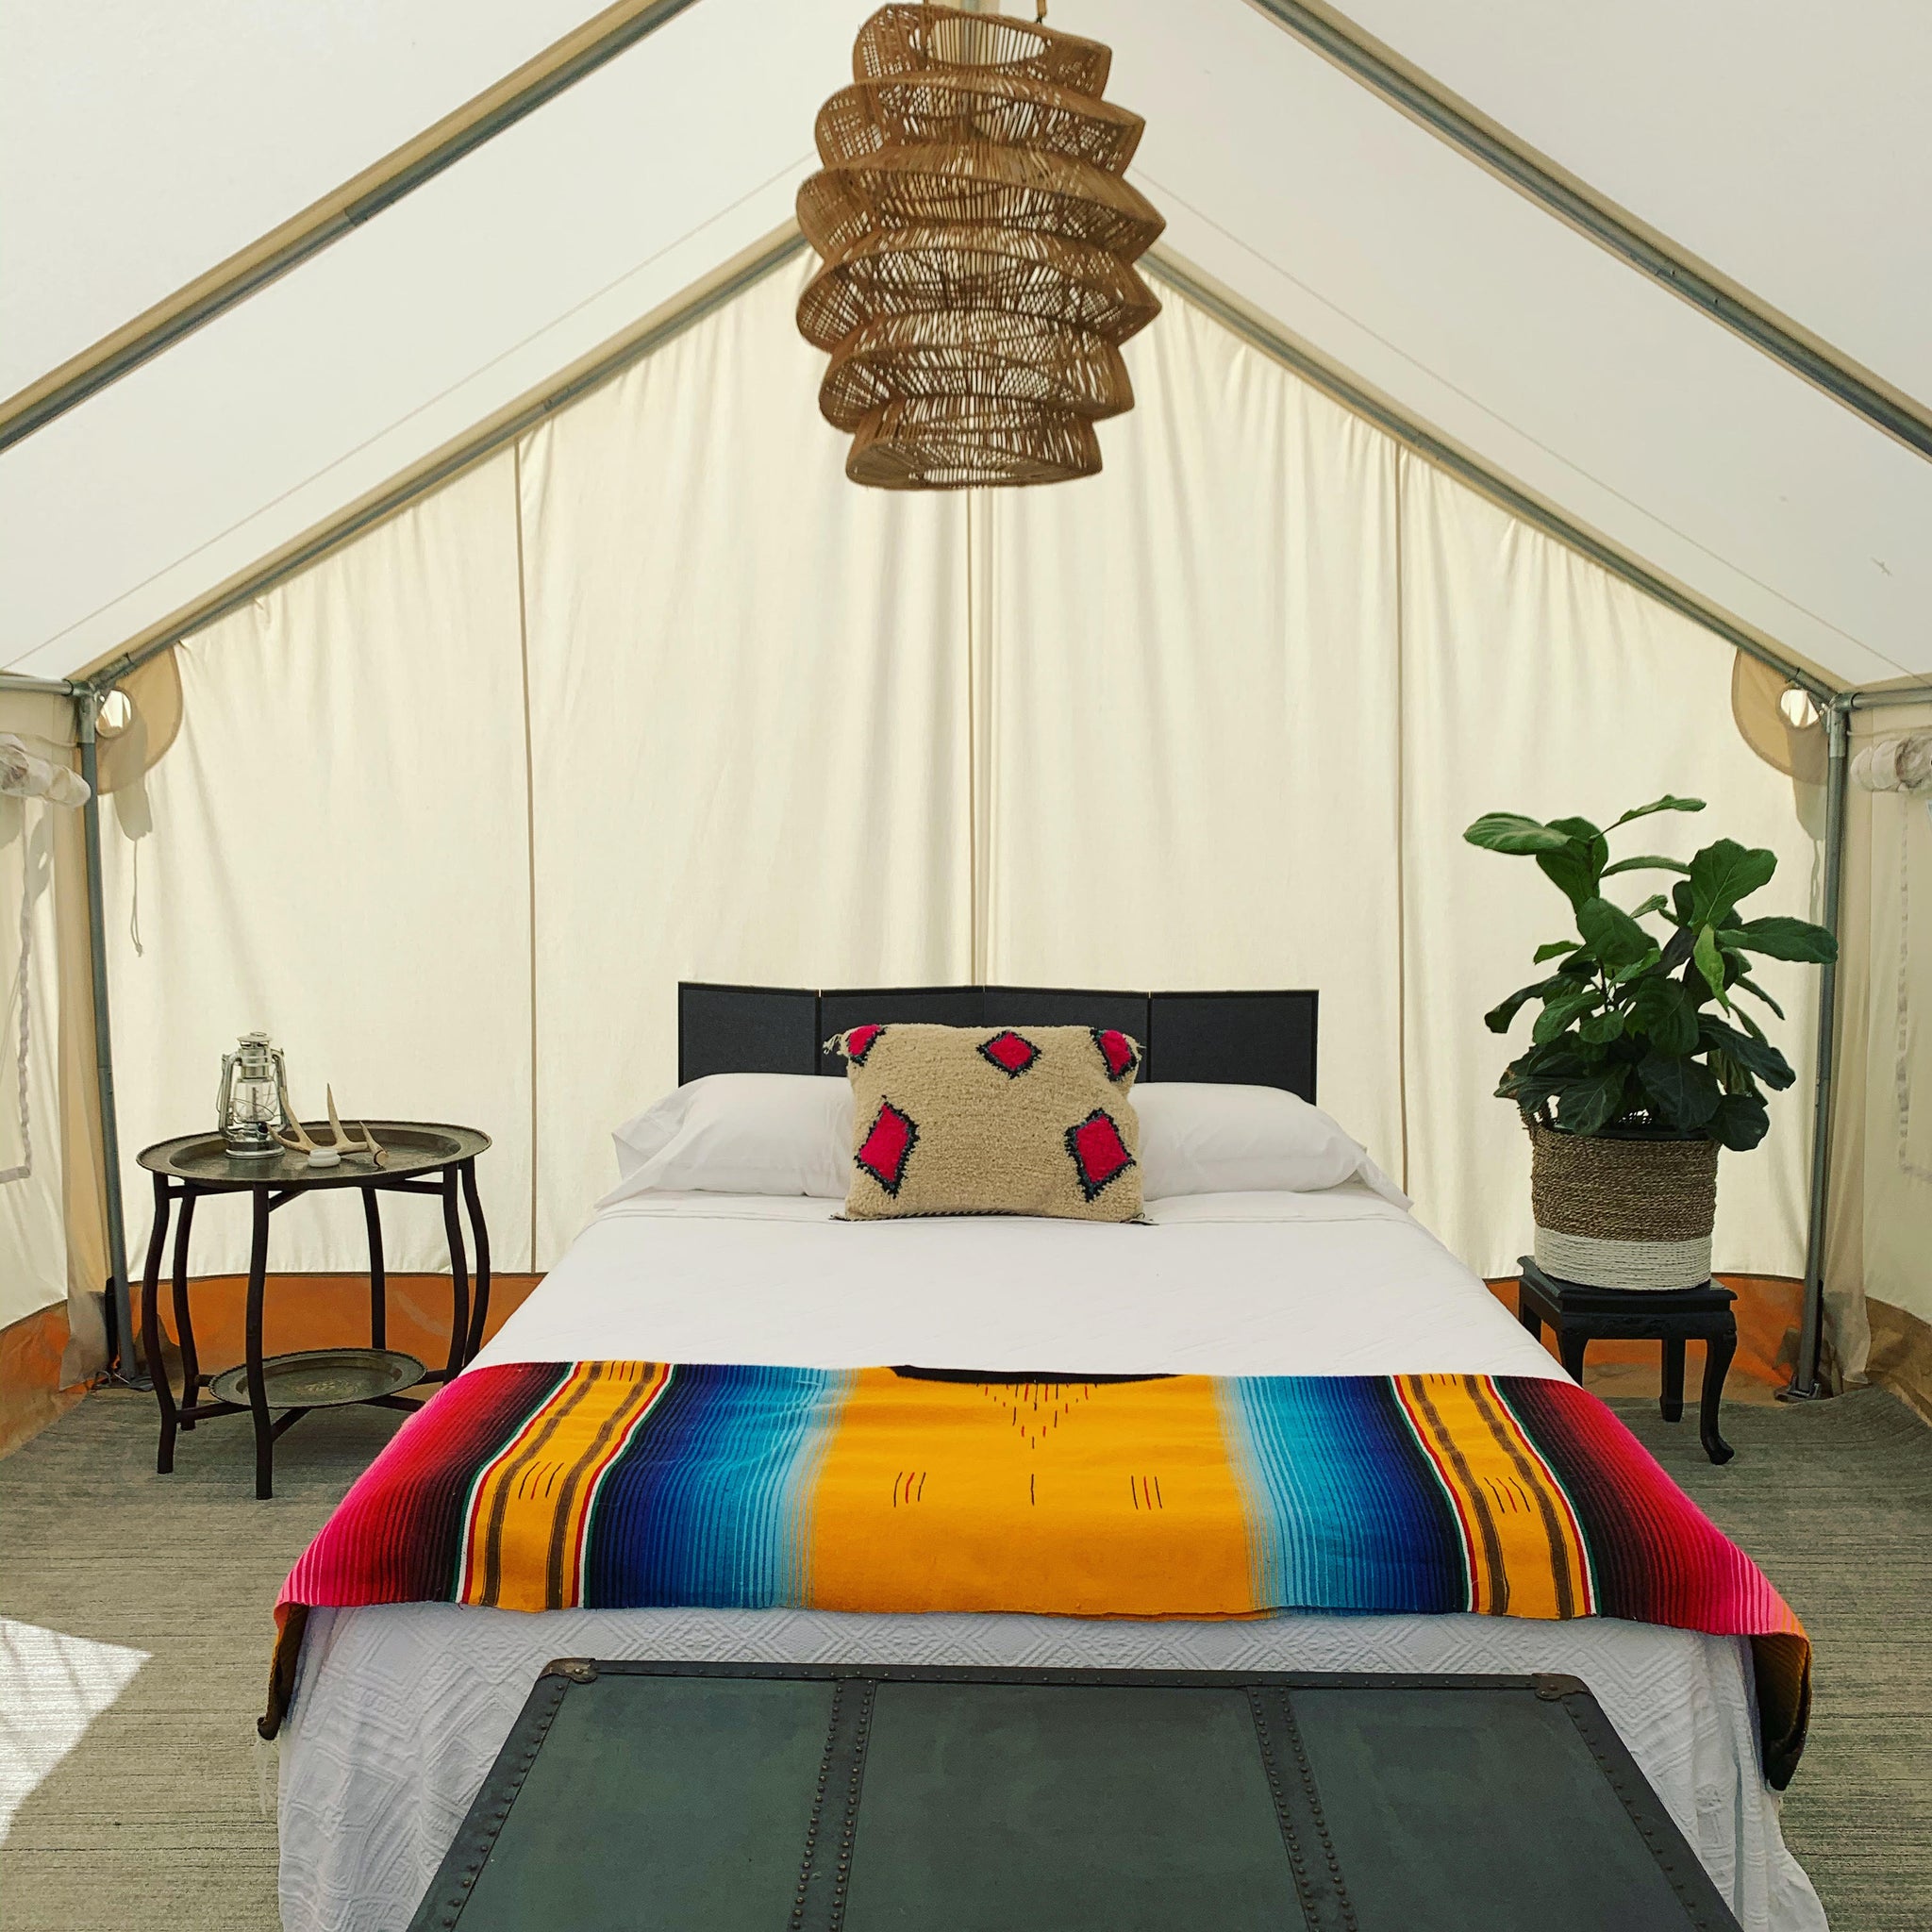 Image of Shawnelle Prestidges 13ft canvas bell tent, glamping tent.  